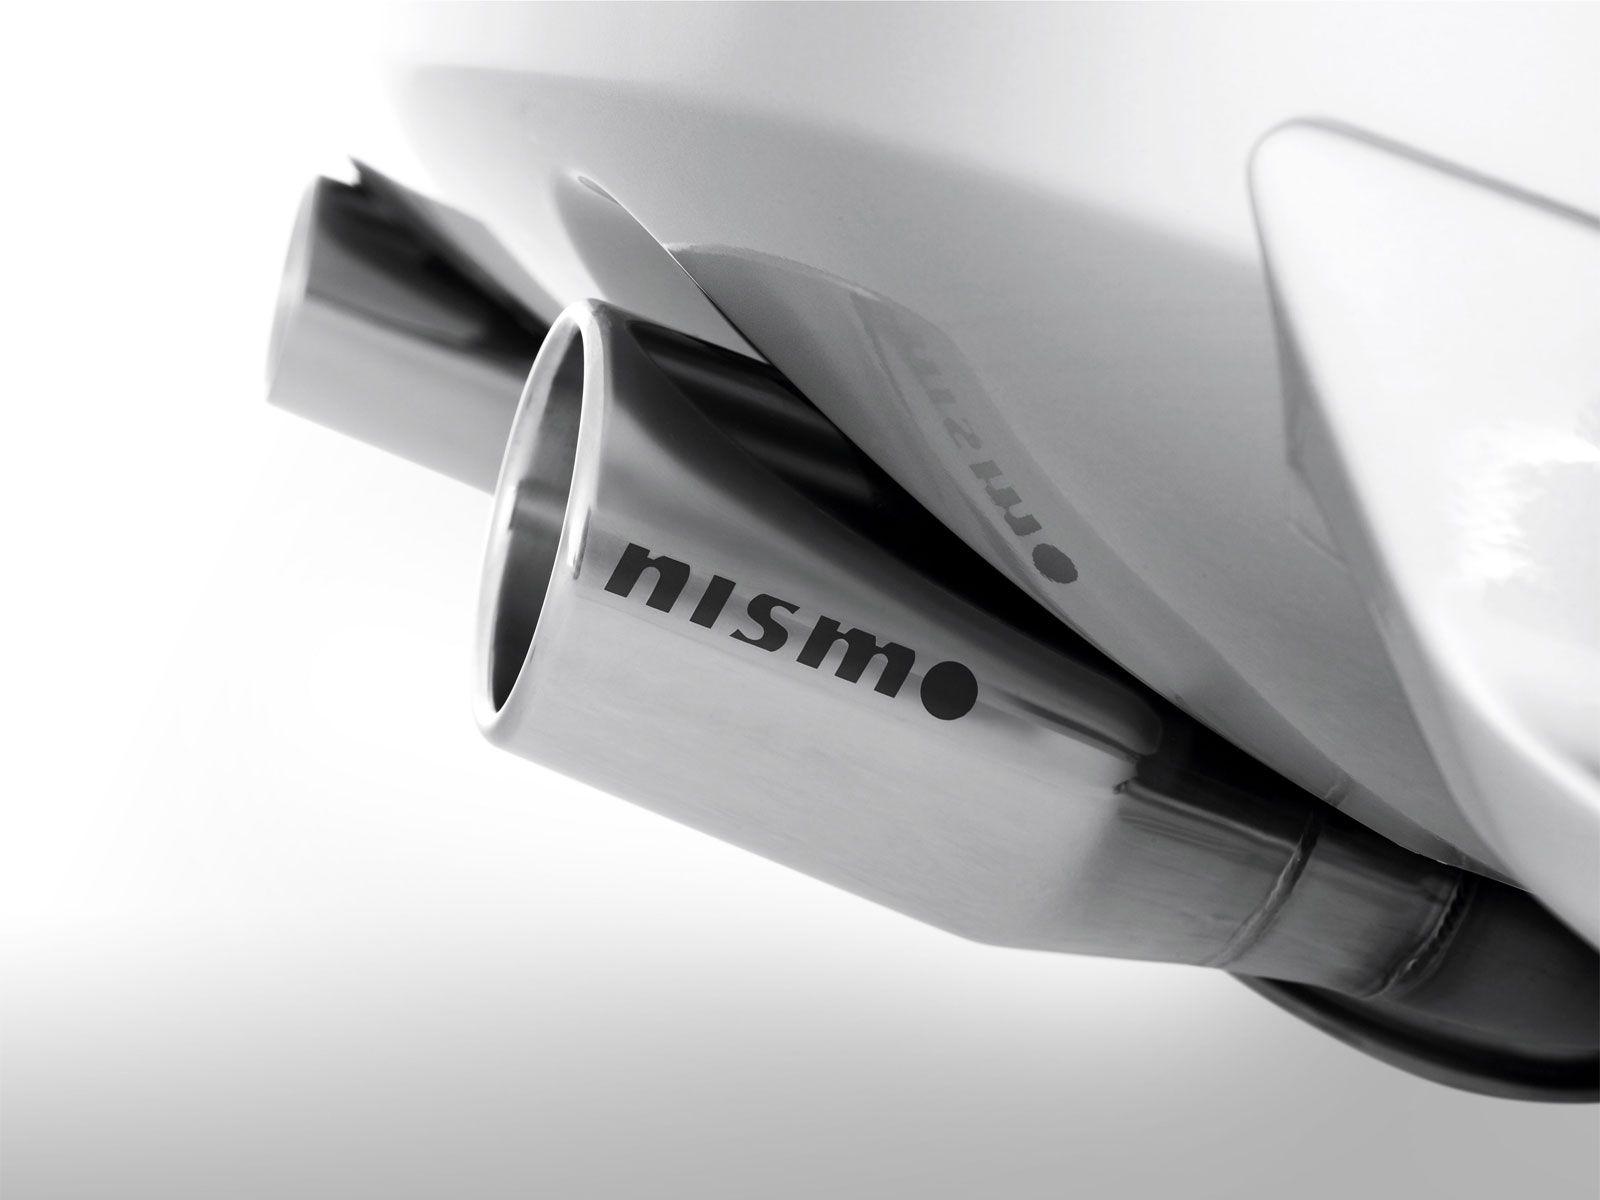 Download the Nismo Tailpipe Wallpaper, Nismo Tailpipe iPhone